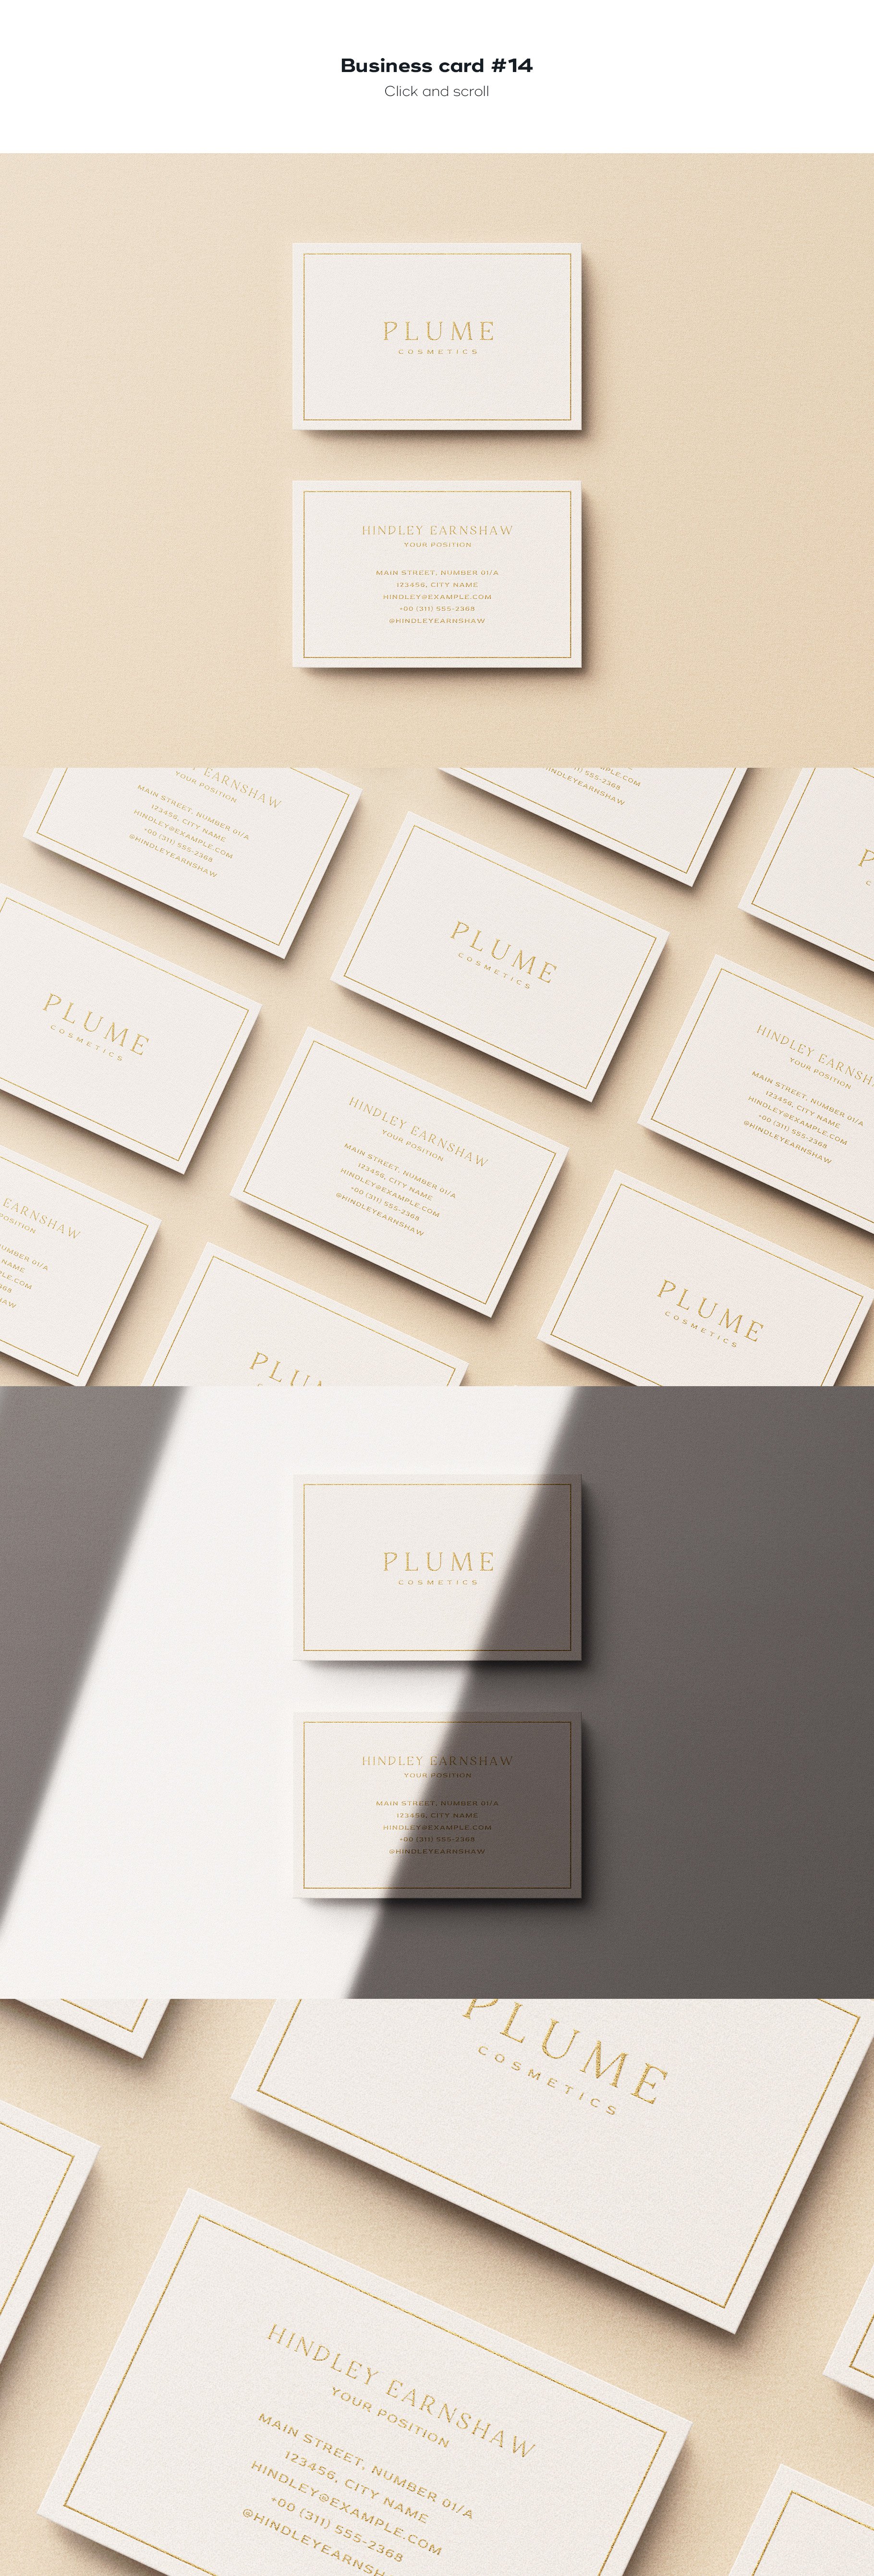 business card 14 912